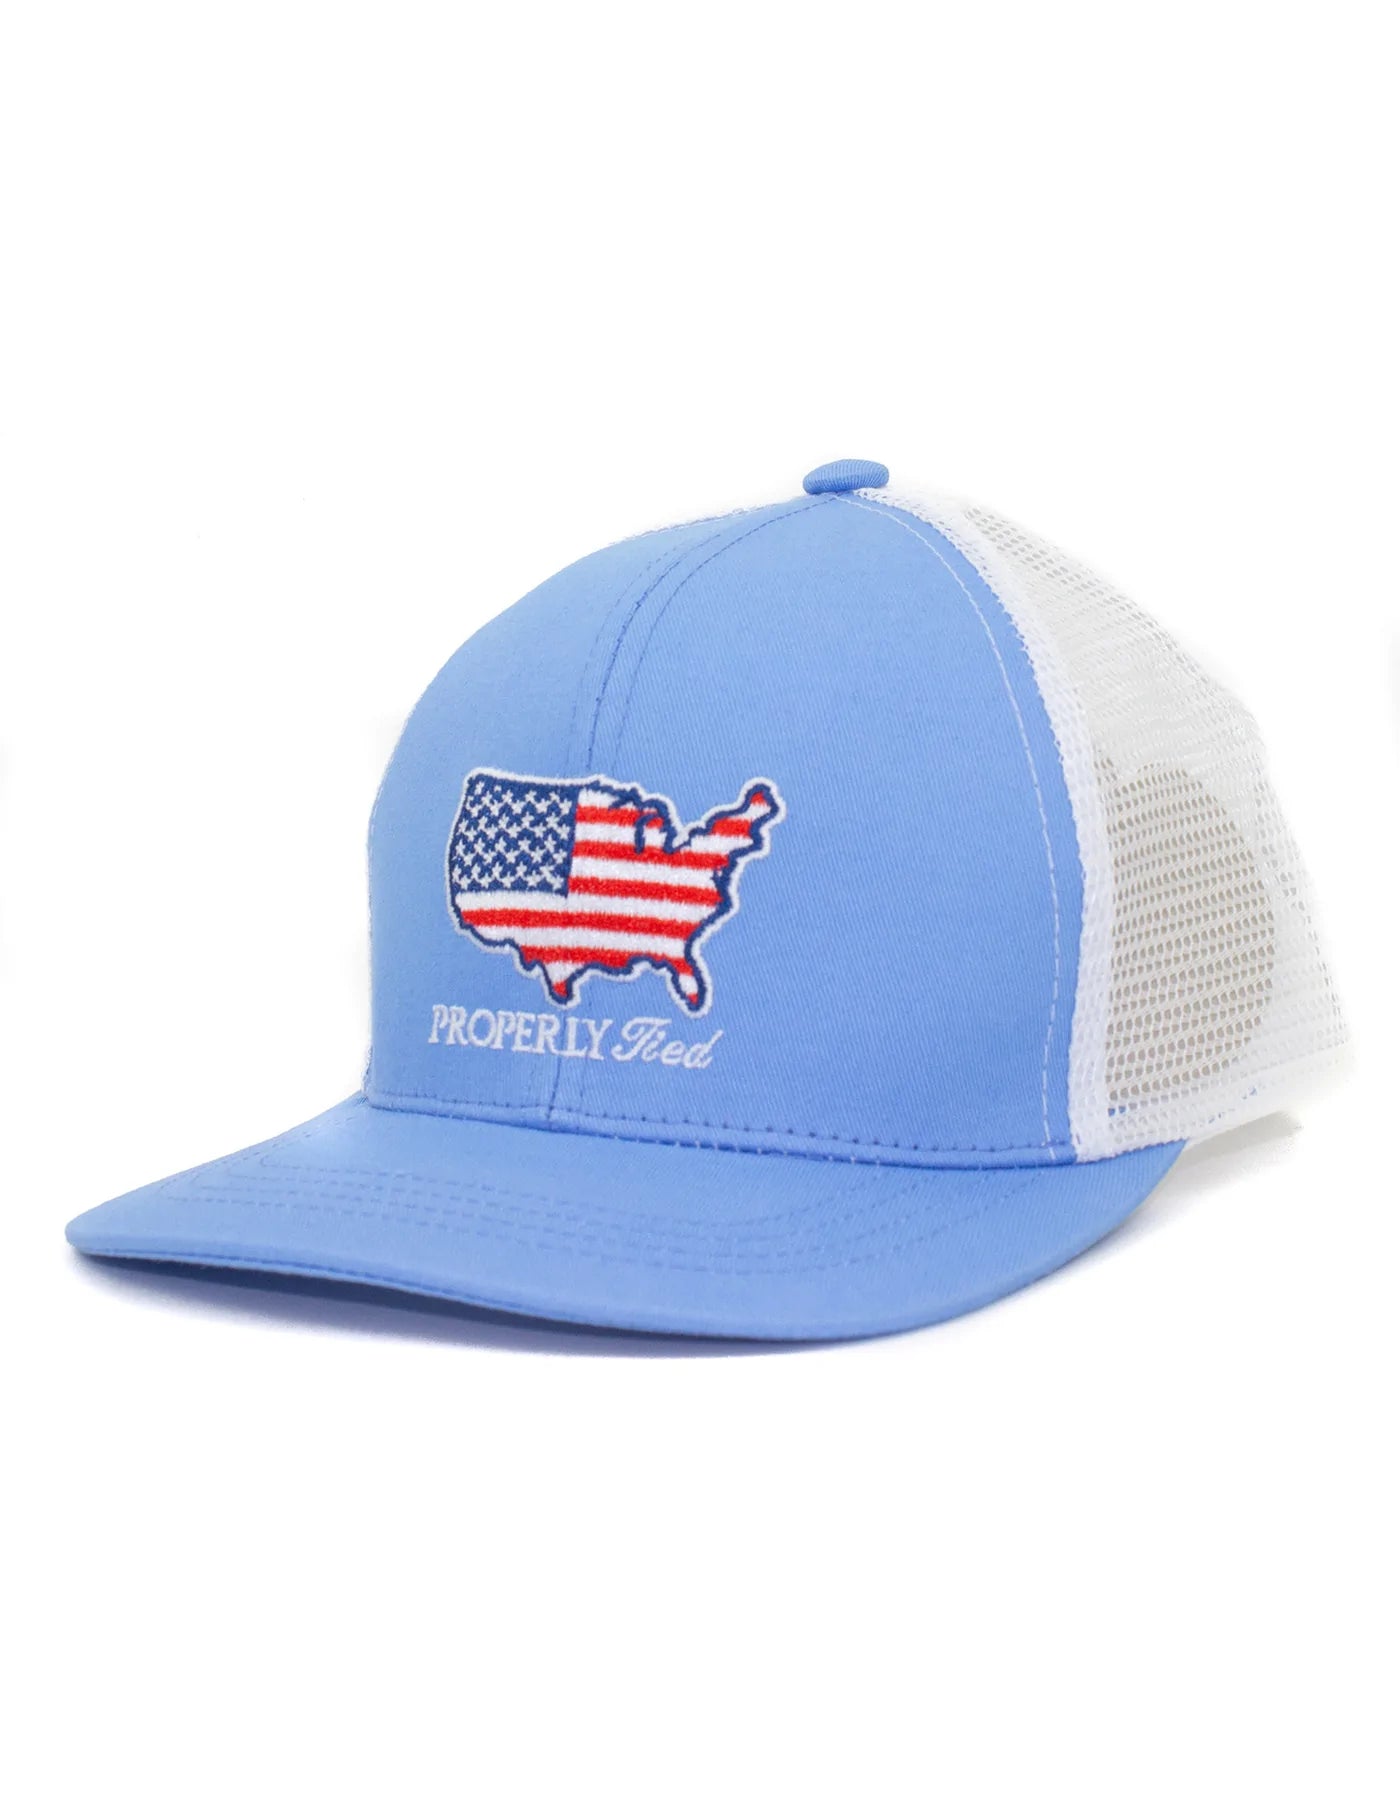 Youth Trucker Hat with Old Glory  - Doodlebug's Children's Boutique